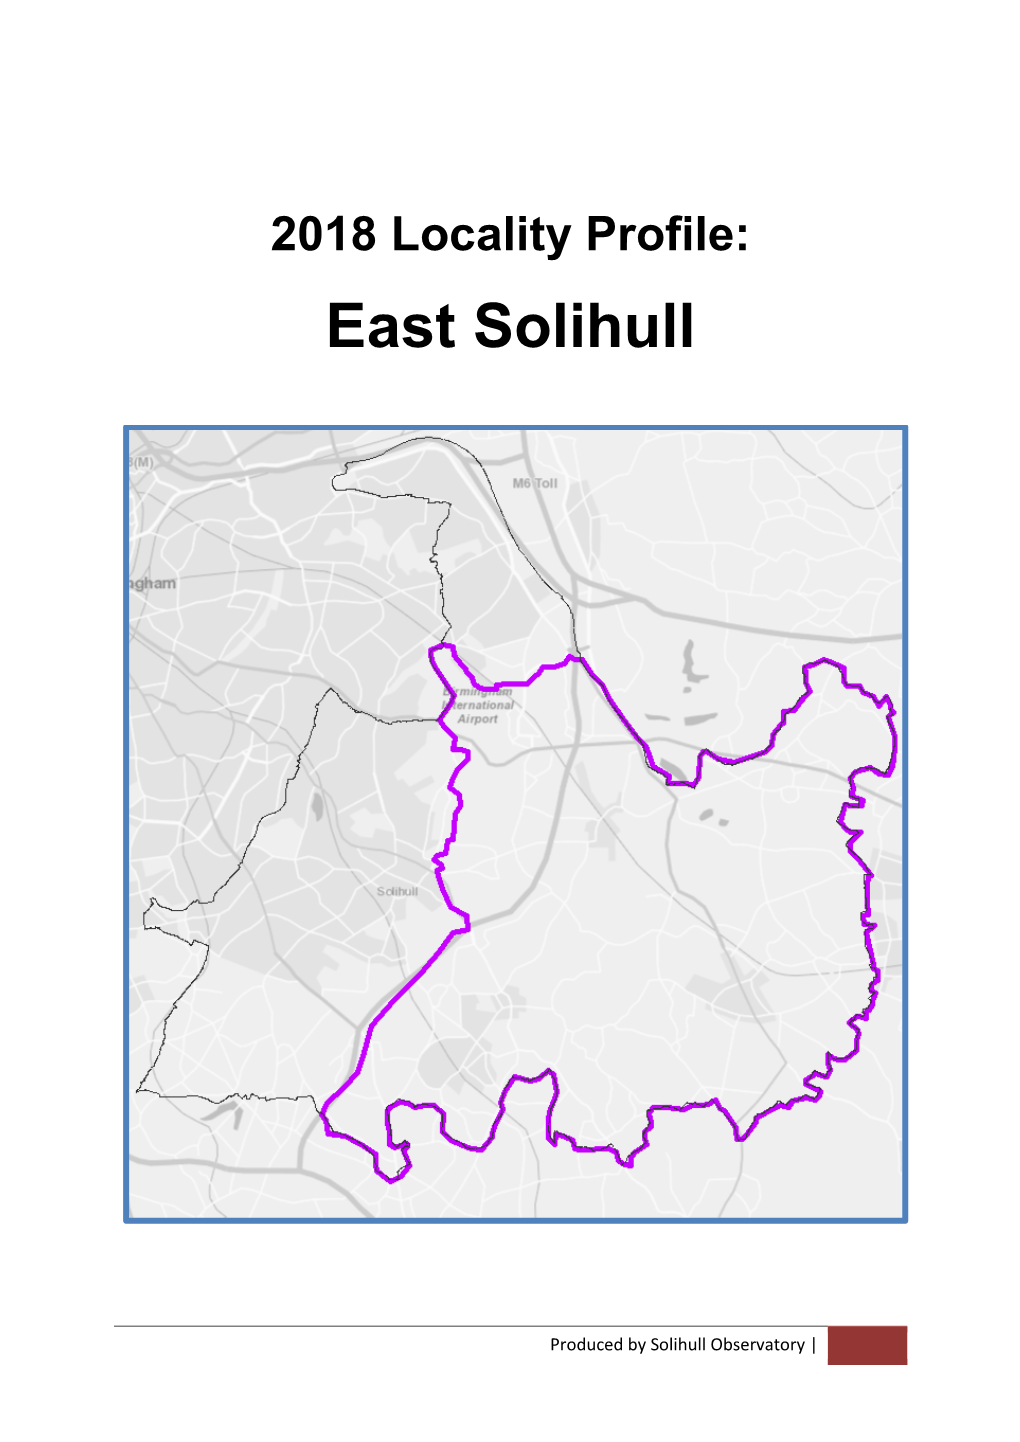 East Solihull Locality Profile